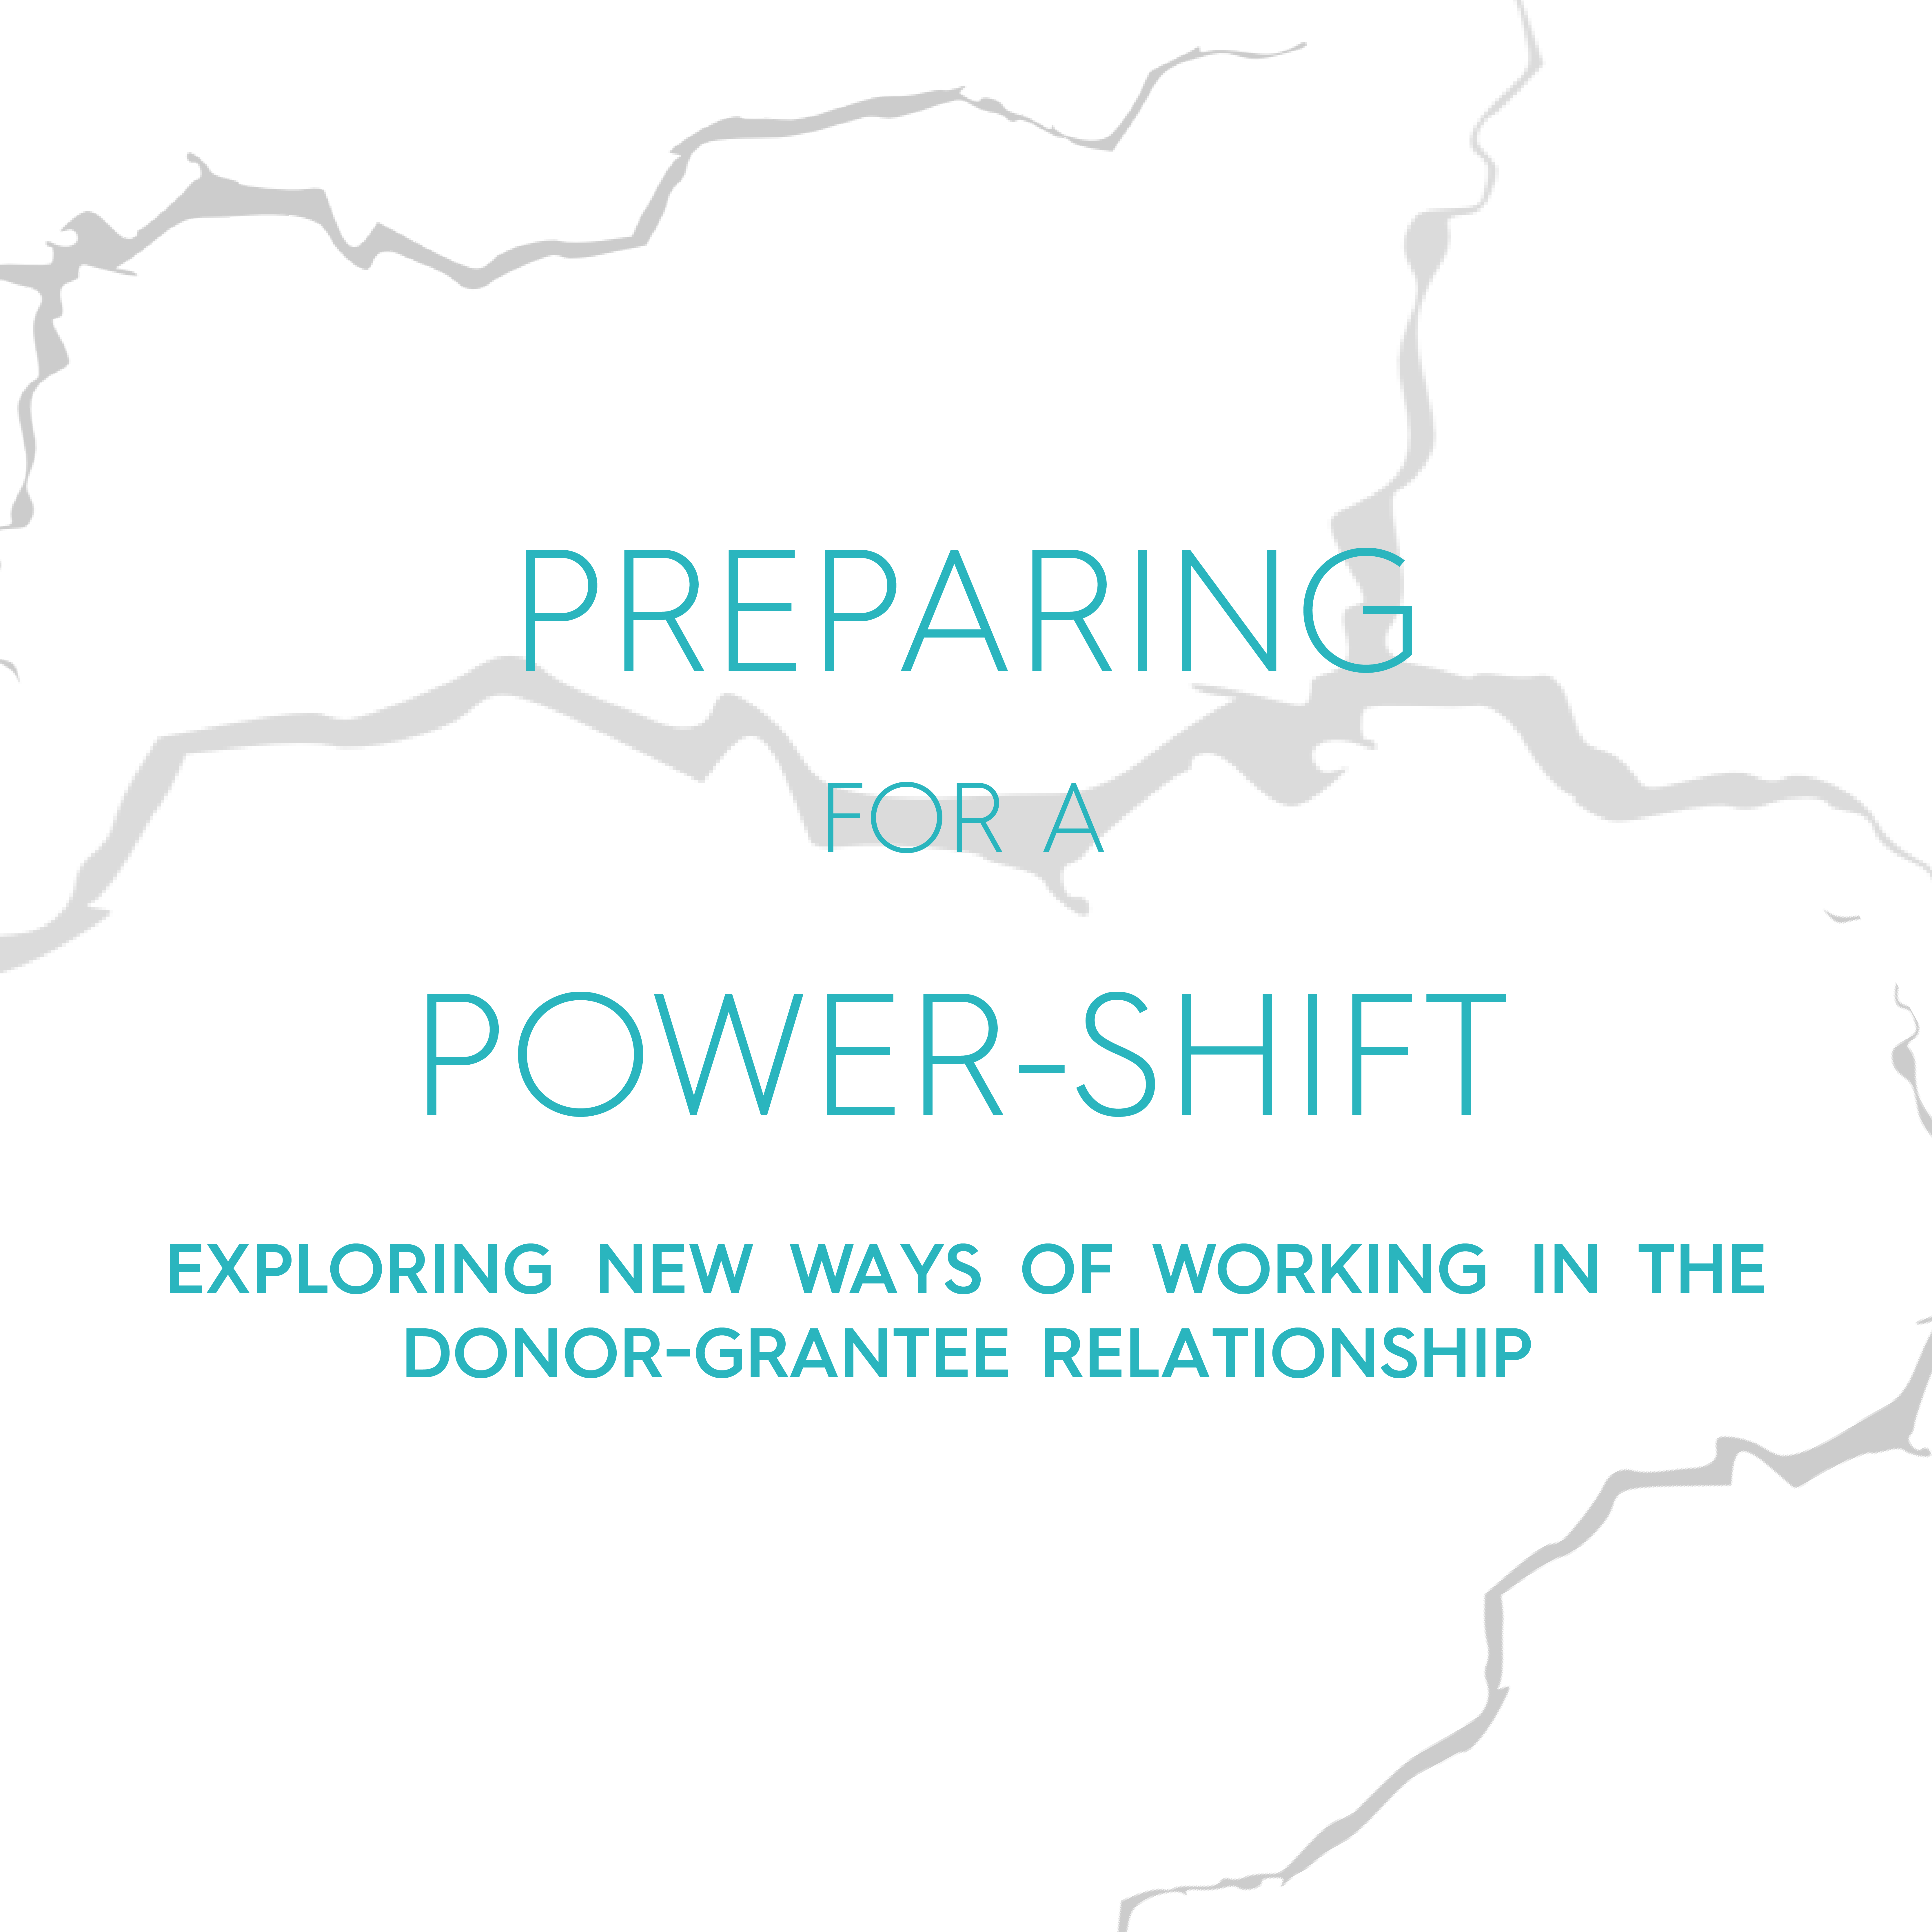 Preparing for a power-shift towards people and communities we work for and with: exploring new ways of working in the donor-grantee relationship